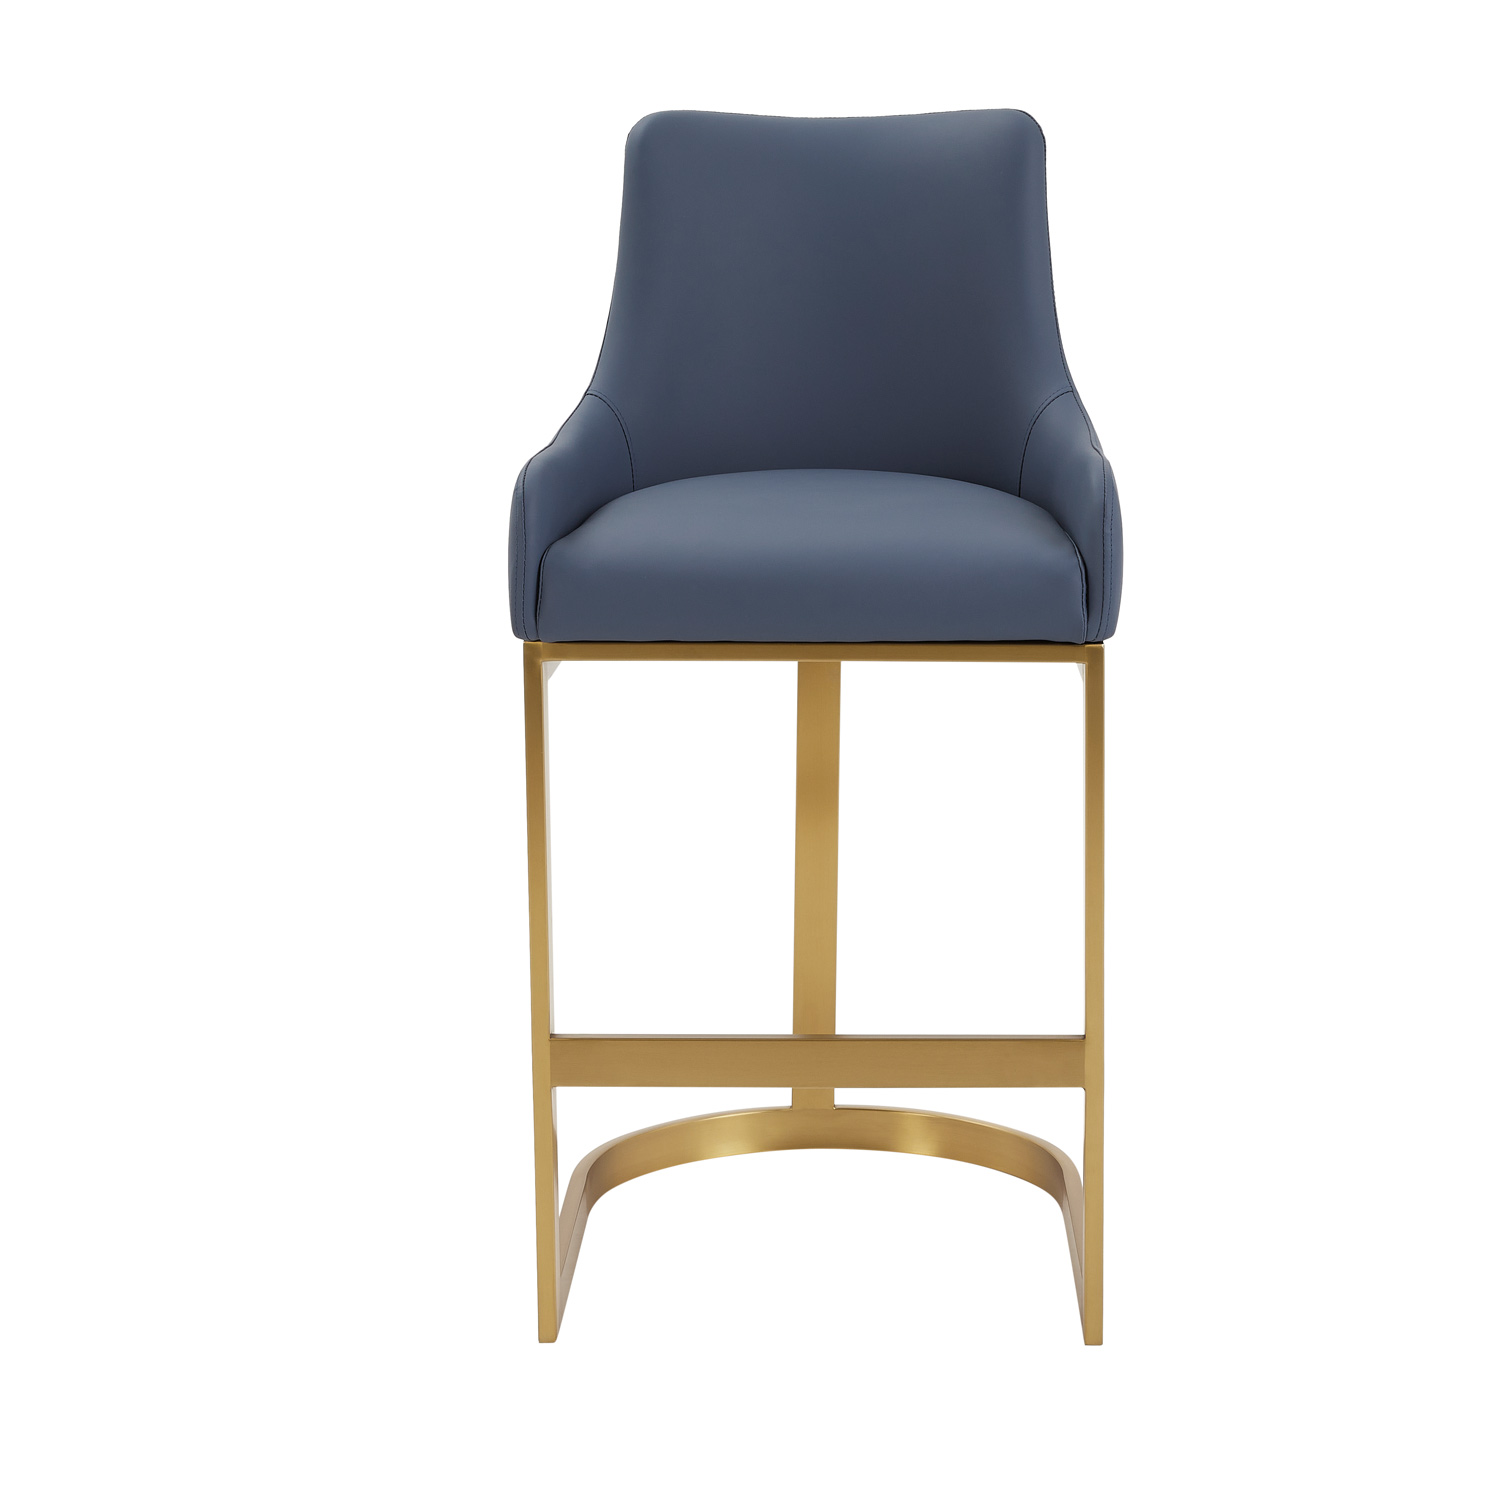 Clara Blue Upholstered Counter Kitchen Stool with Gold Steel Frame